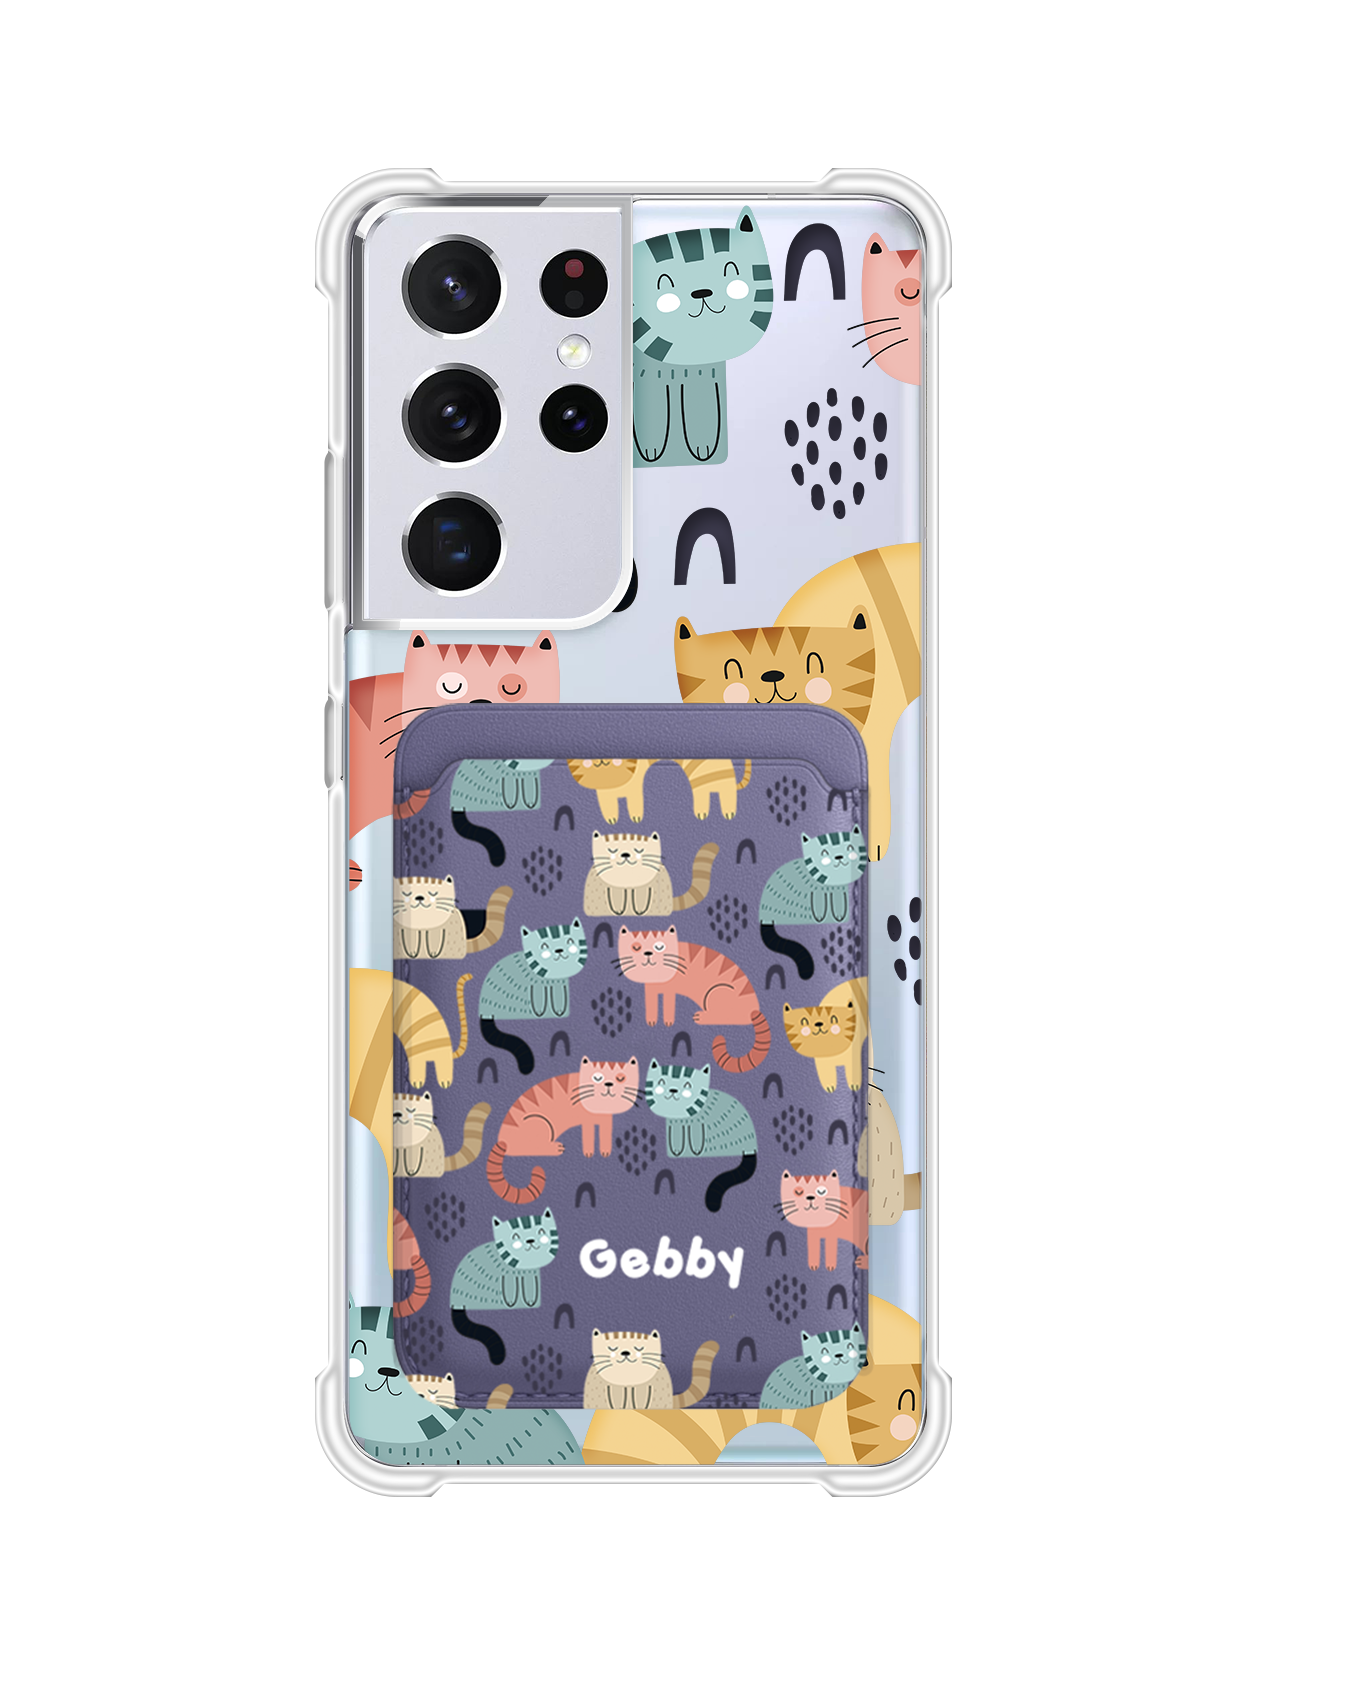 Android Magnetic Wallet Case - Rainbow Meow 1.0